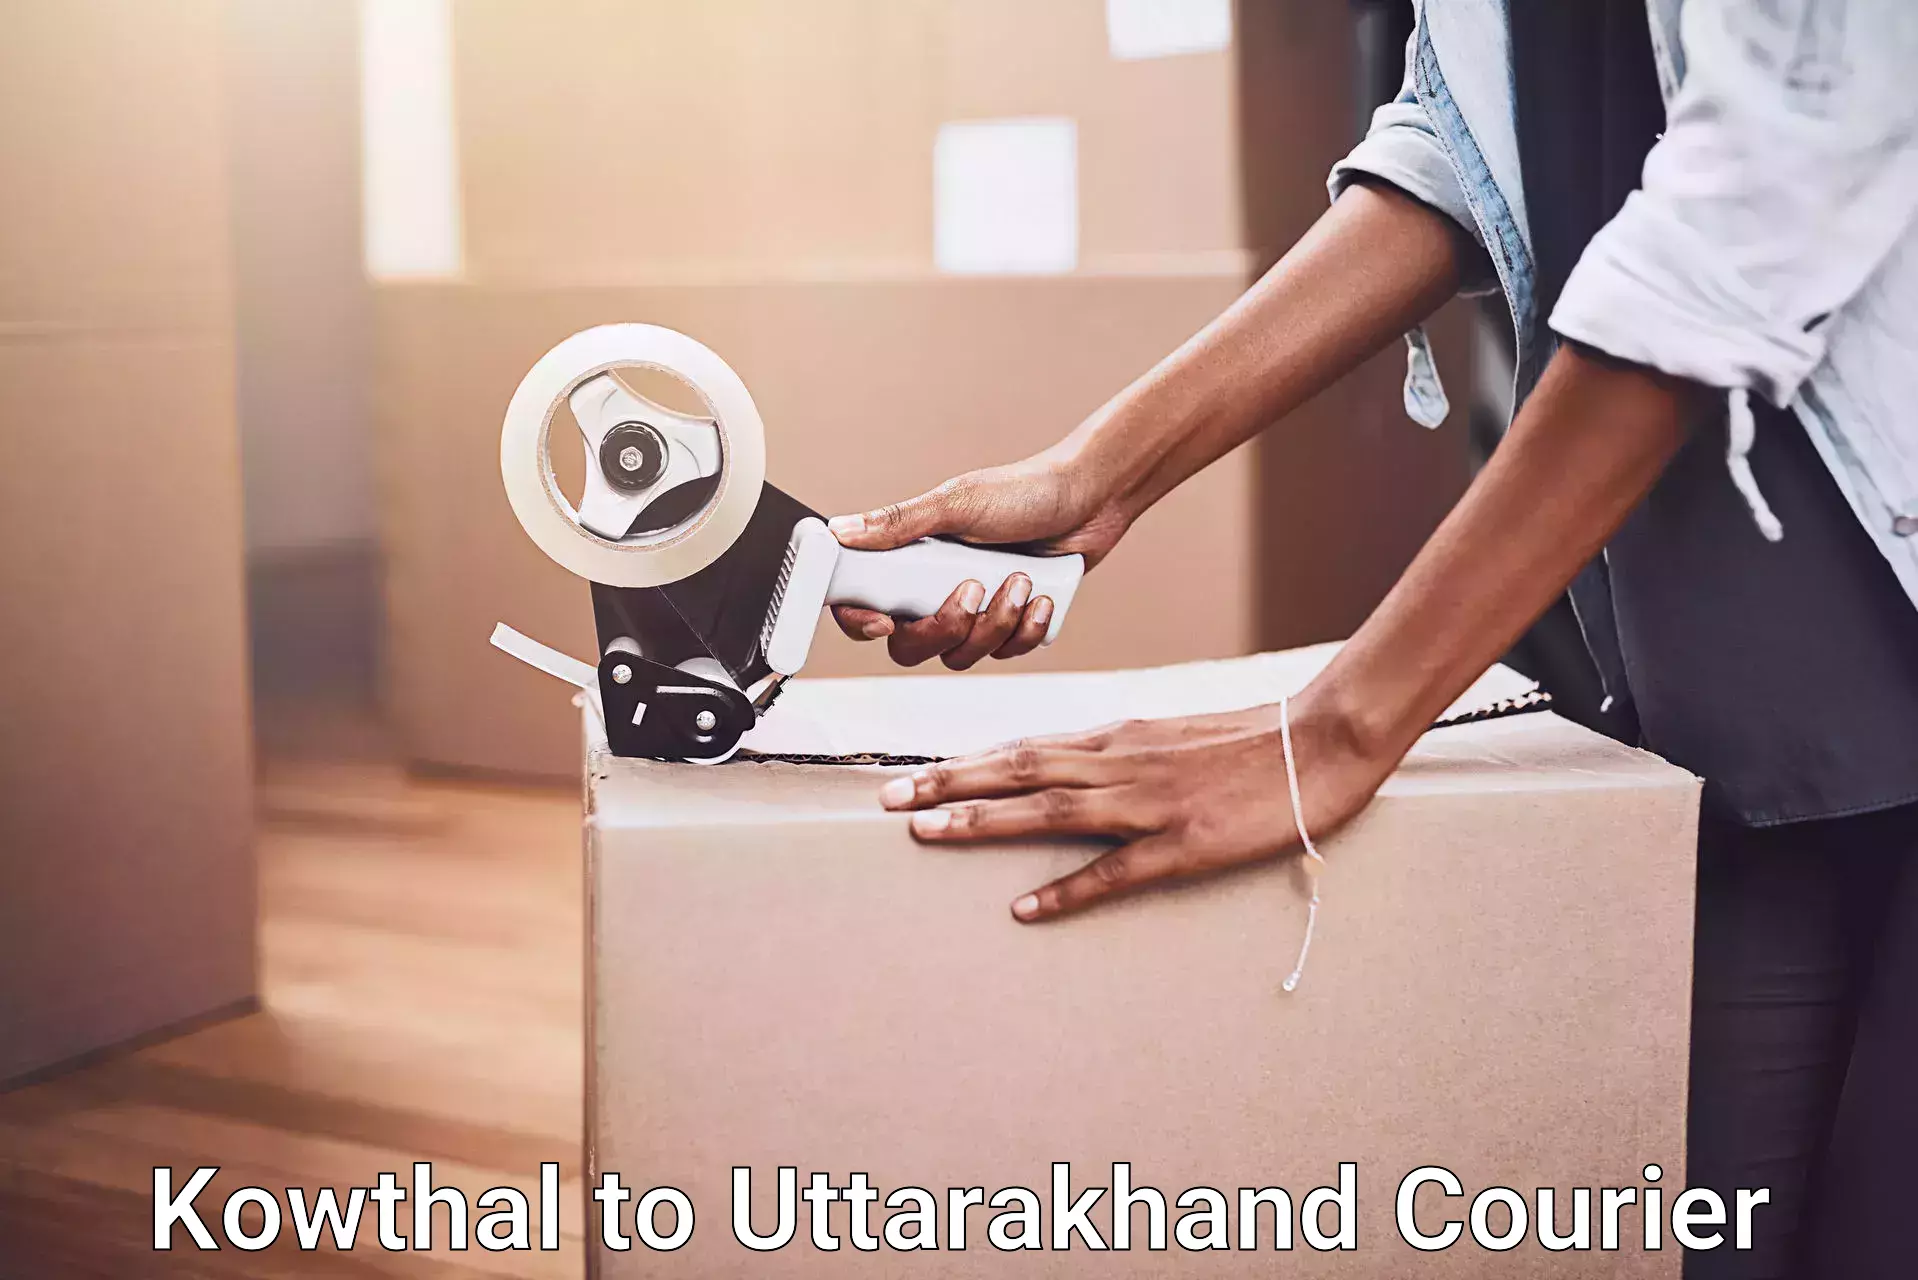 Moving and packing experts Kowthal to Uttarakhand